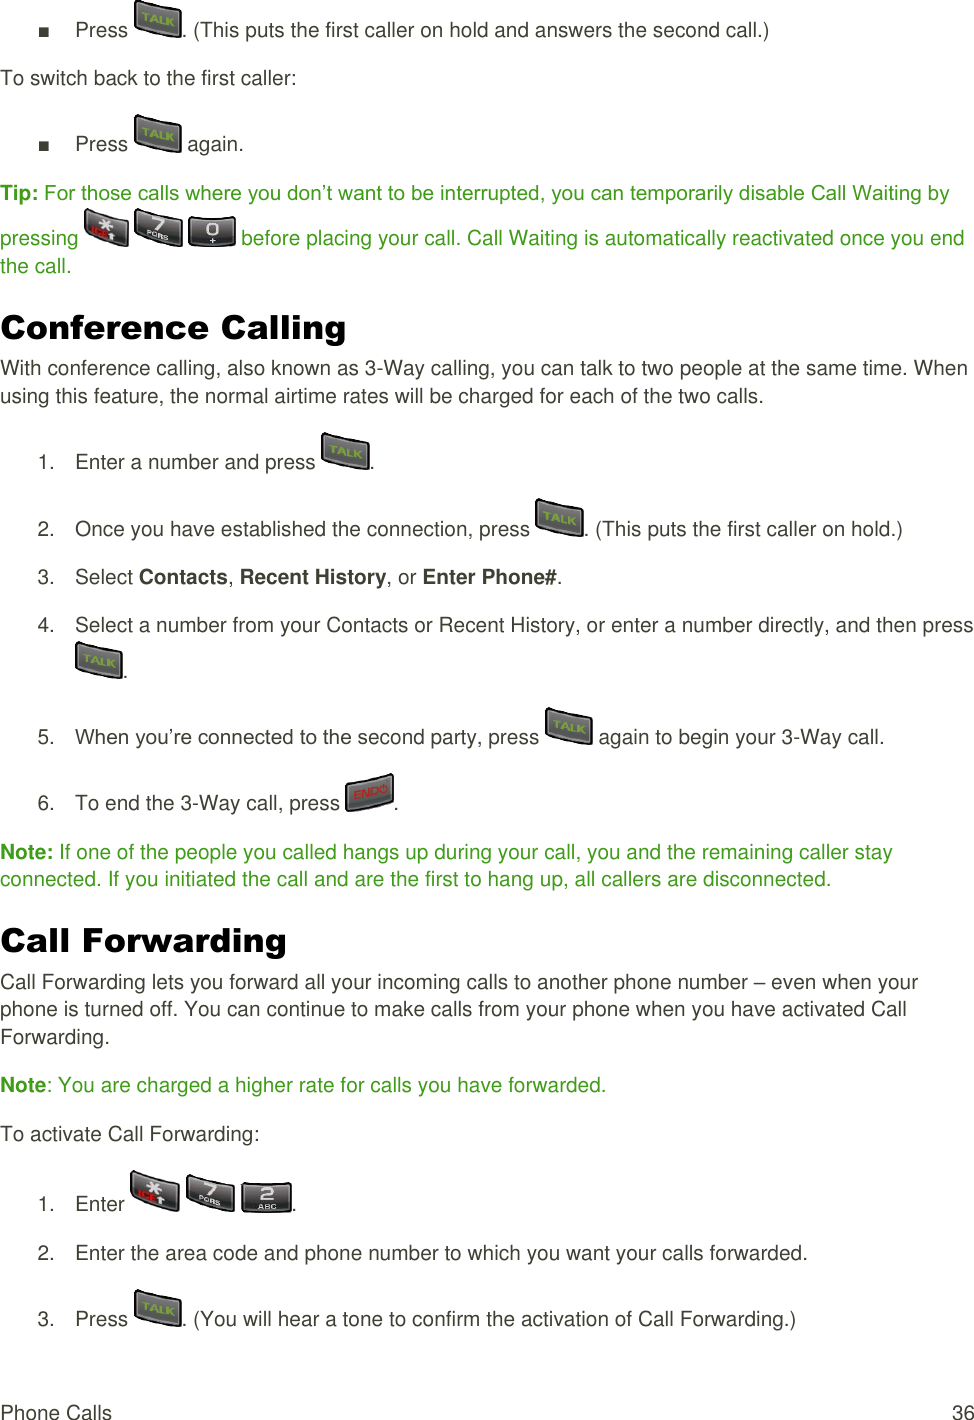  Phone Calls  36 ■  Press  . (This puts the first caller on hold and answers the second call.) To switch back to the first caller: ■  Press   again. Tip: For those calls where you don’t want to be interrupted, you can temporarily disable Call Waiting by pressing       before placing your call. Call Waiting is automatically reactivated once you end the call. Conference Calling  With conference calling, also known as 3-Way calling, you can talk to two people at the same time. When using this feature, the normal airtime rates will be charged for each of the two calls. 1.  Enter a number and press  . 2.  Once you have established the connection, press  . (This puts the first caller on hold.) 3.  Select Contacts, Recent History, or Enter Phone#. 4.  Select a number from your Contacts or Recent History, or enter a number directly, and then press . 5. When you’re connected to the second party, press   again to begin your 3-Way call. 6.  To end the 3-Way call, press  . Note: If one of the people you called hangs up during your call, you and the remaining caller stay connected. If you initiated the call and are the first to hang up, all callers are disconnected. Call Forwarding  Call Forwarding lets you forward all your incoming calls to another phone number – even when your phone is turned off. You can continue to make calls from your phone when you have activated Call Forwarding. Note: You are charged a higher rate for calls you have forwarded. To activate Call Forwarding: 1.  Enter      . 2.  Enter the area code and phone number to which you want your calls forwarded. 3.  Press  . (You will hear a tone to confirm the activation of Call Forwarding.) 